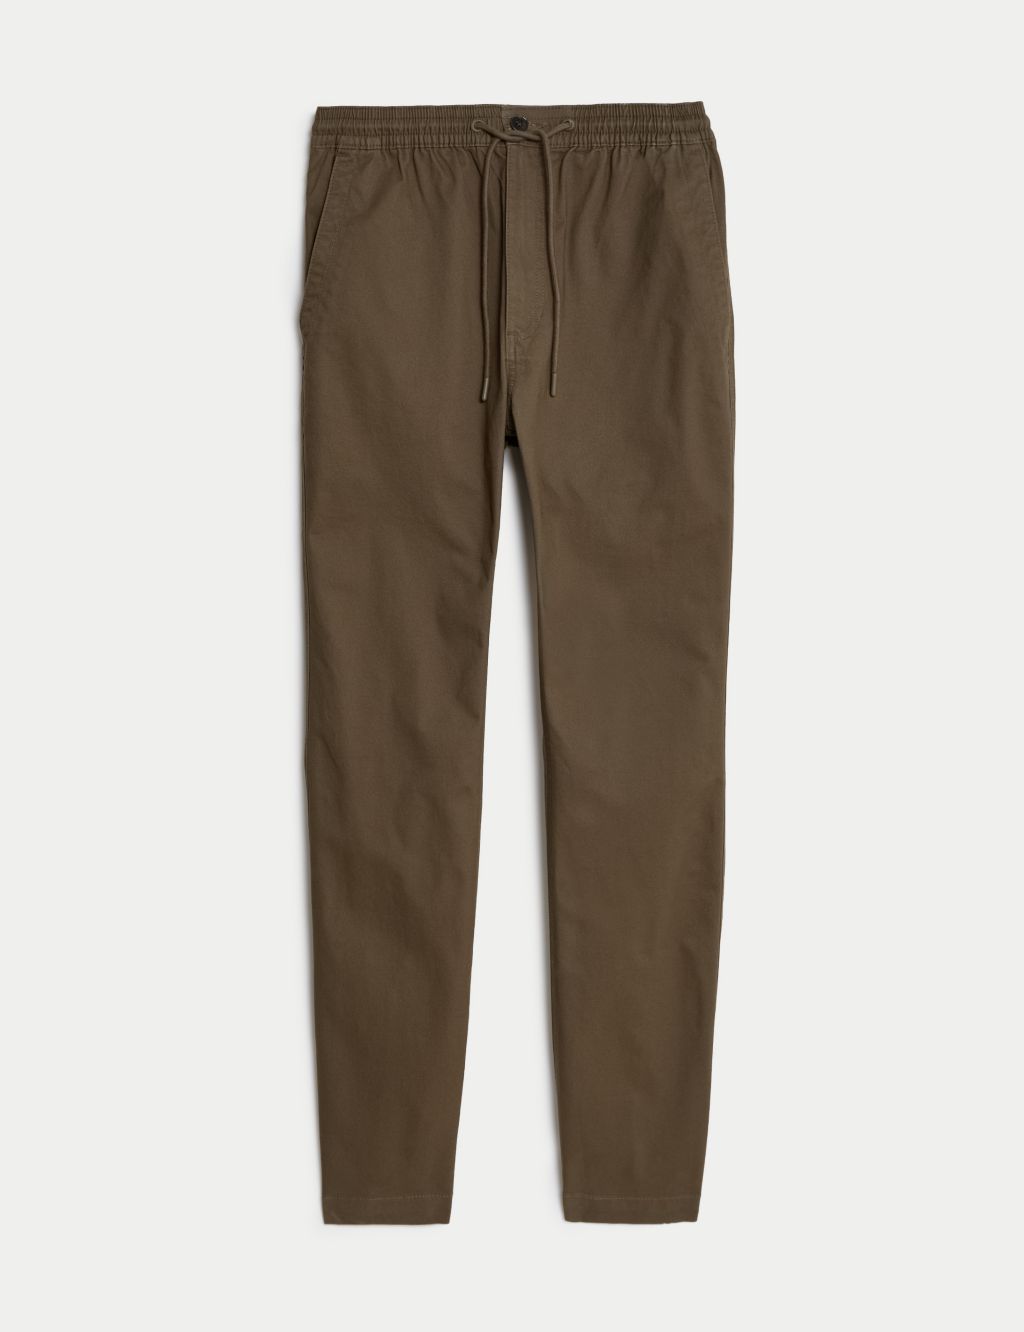 Tapered Fit Woven Stretch Trousers image 2